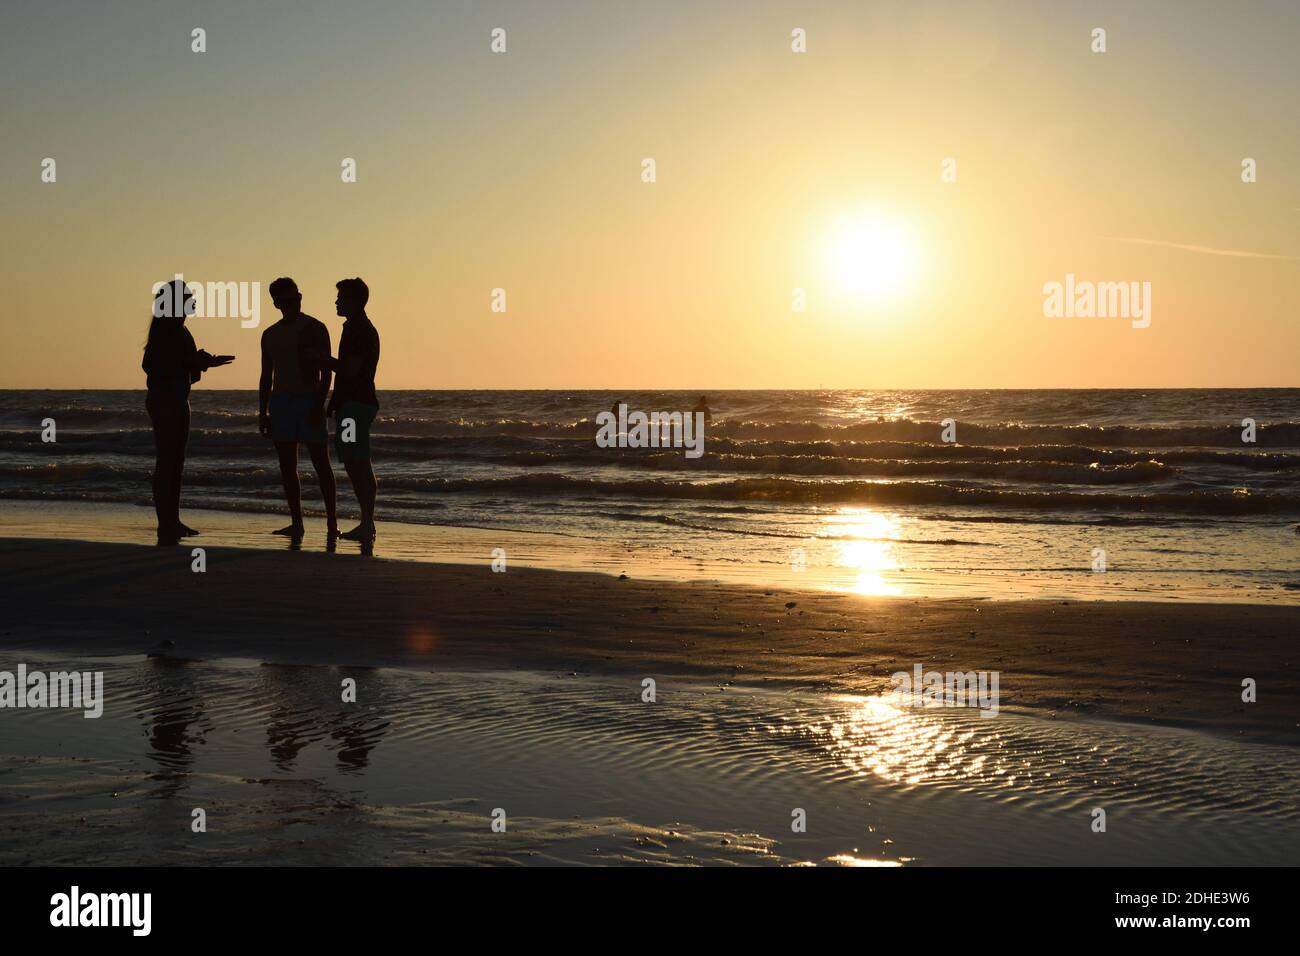 Silhouette of three people standing on Clearwater beach talking at sunset. Stock Photo